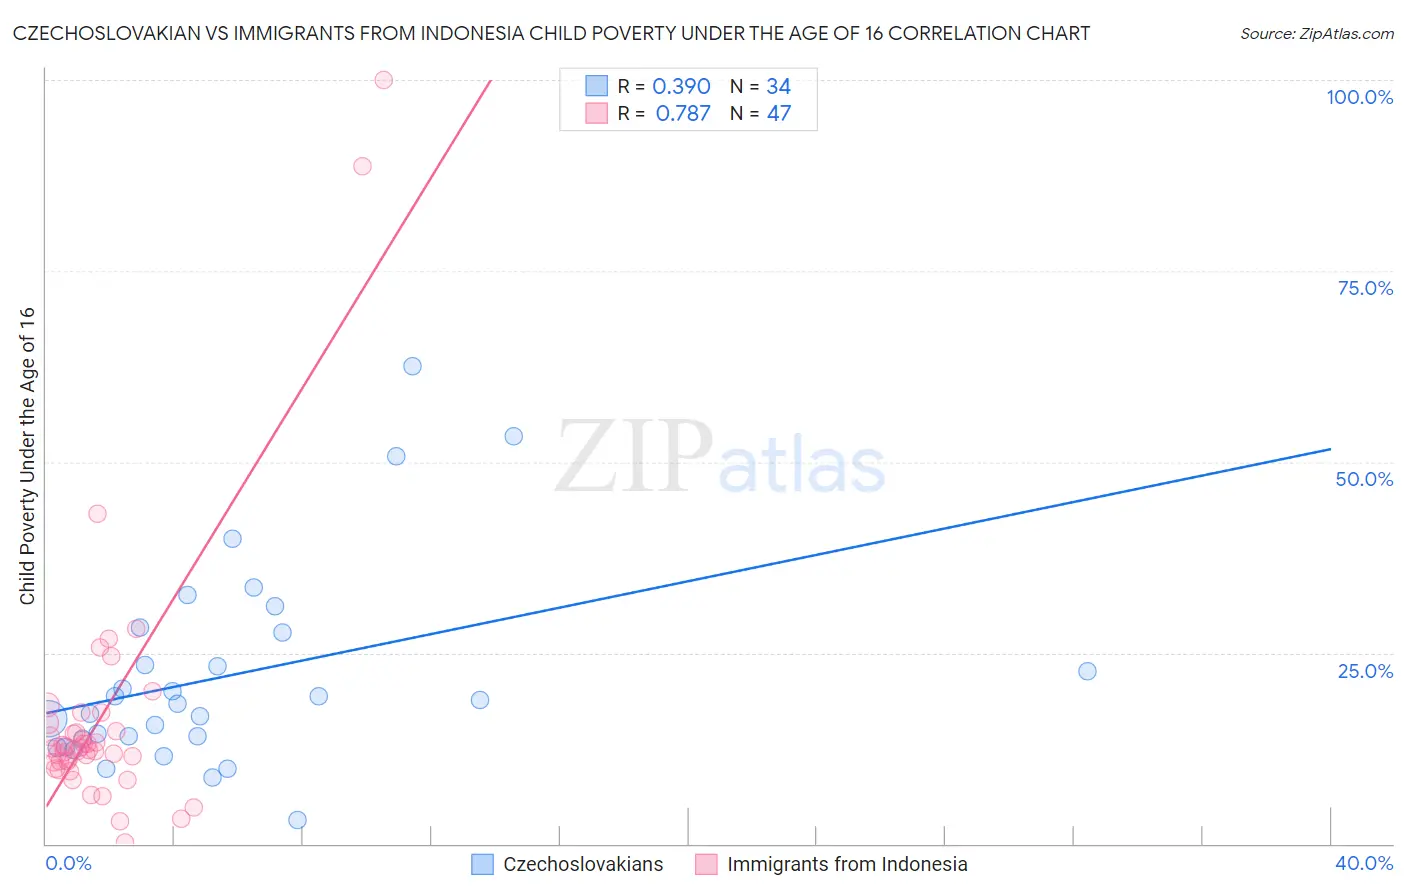 Czechoslovakian vs Immigrants from Indonesia Child Poverty Under the Age of 16